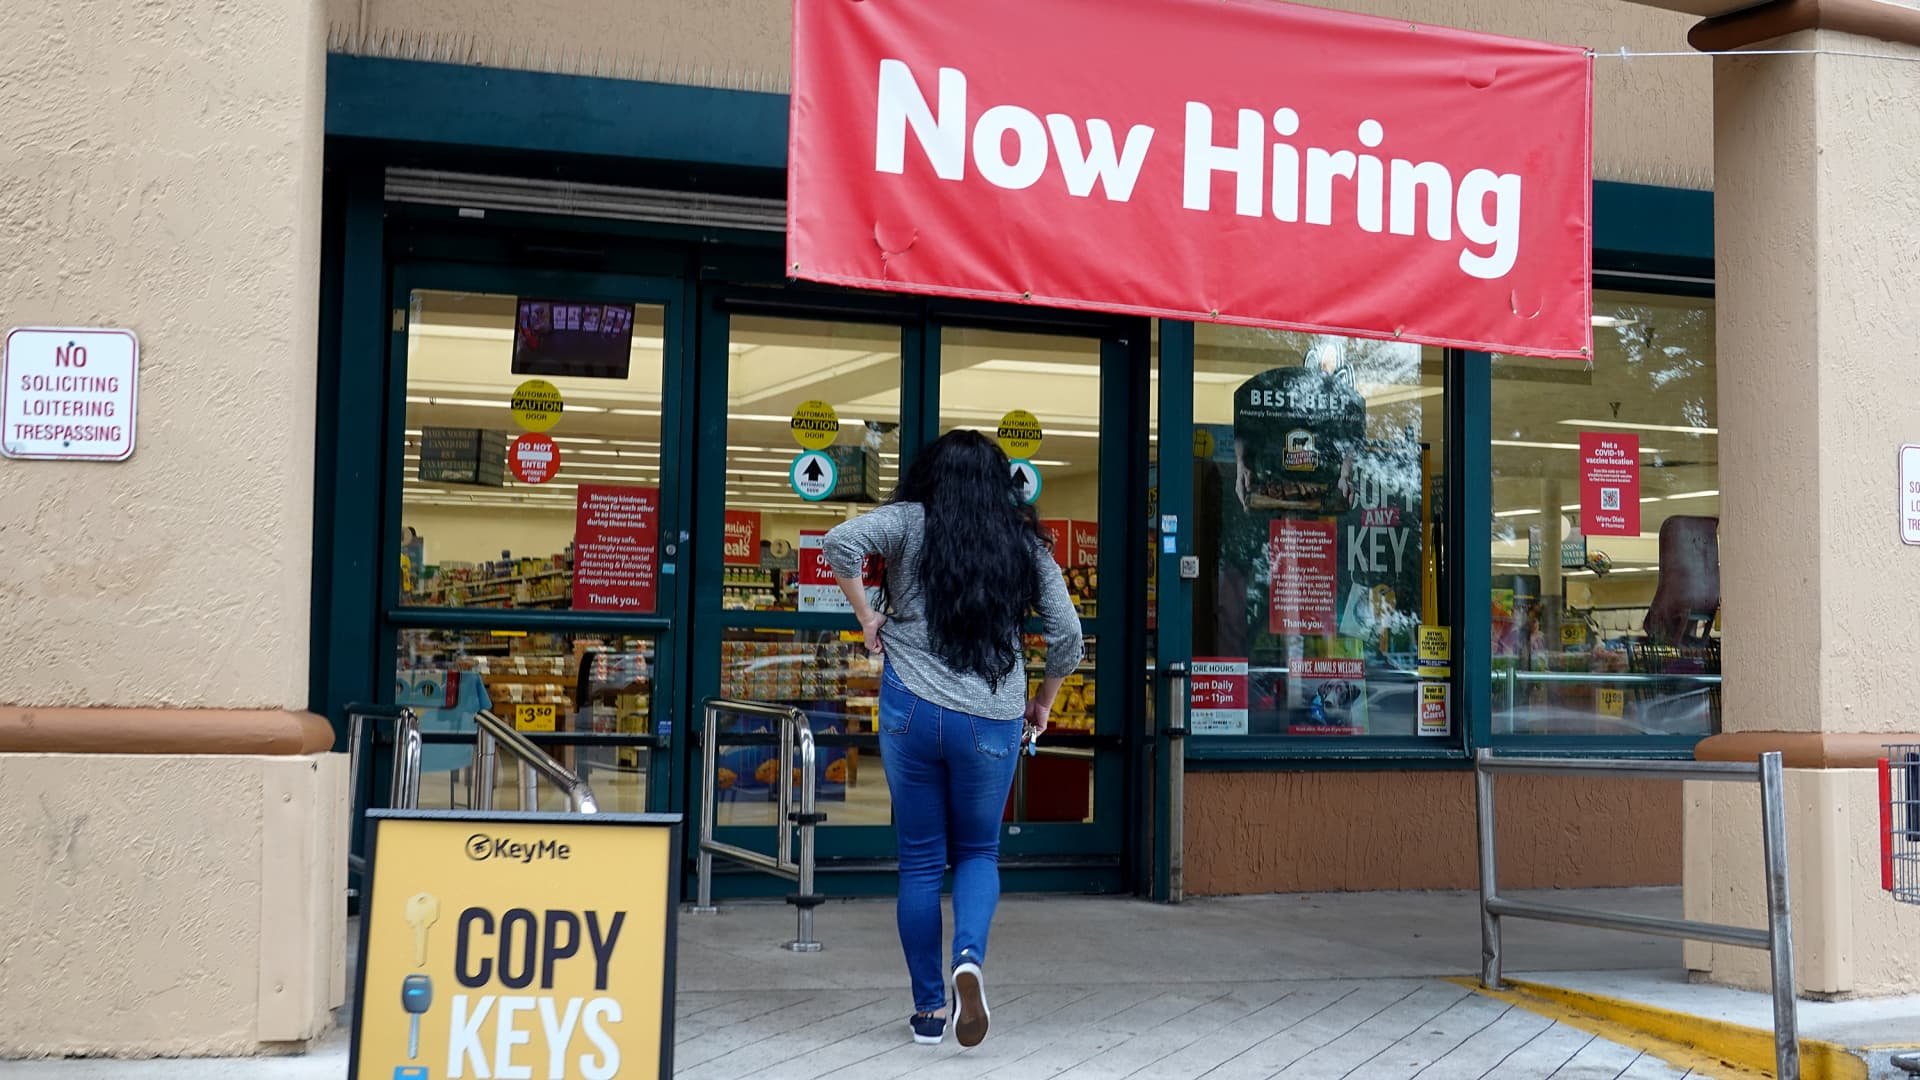 Black unemployment rate dips, labor force participation rises in January